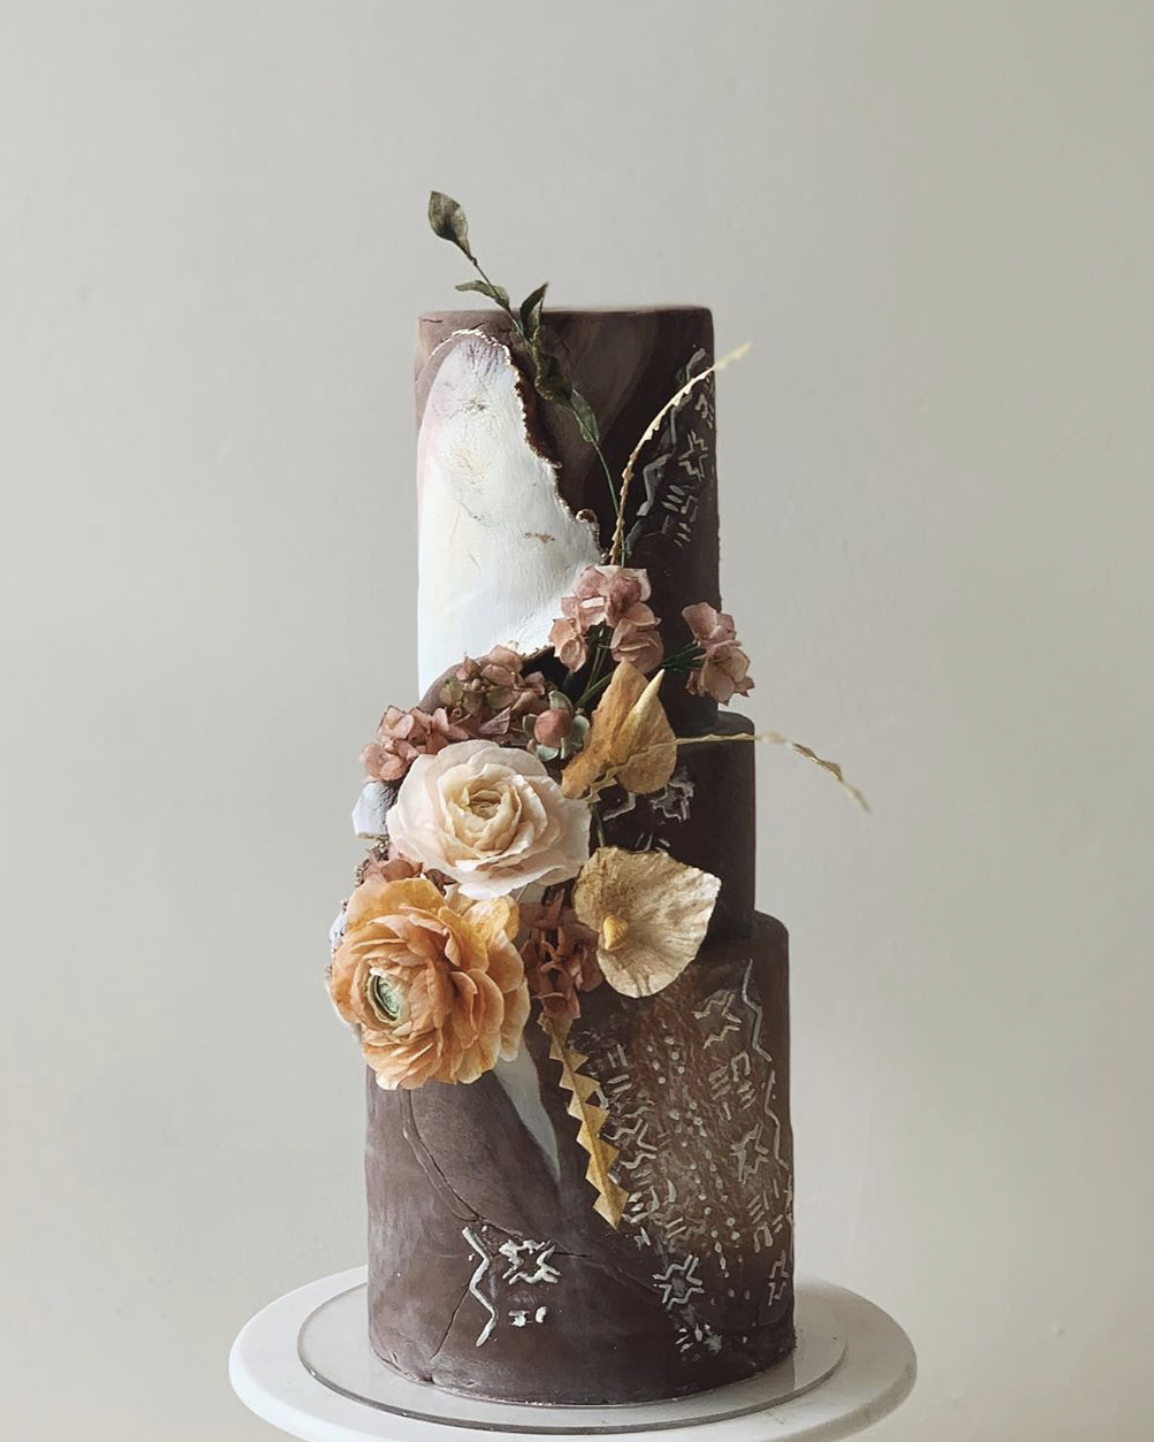 Winifred Kristie Top 30 Best Cake Designers in the World - 22